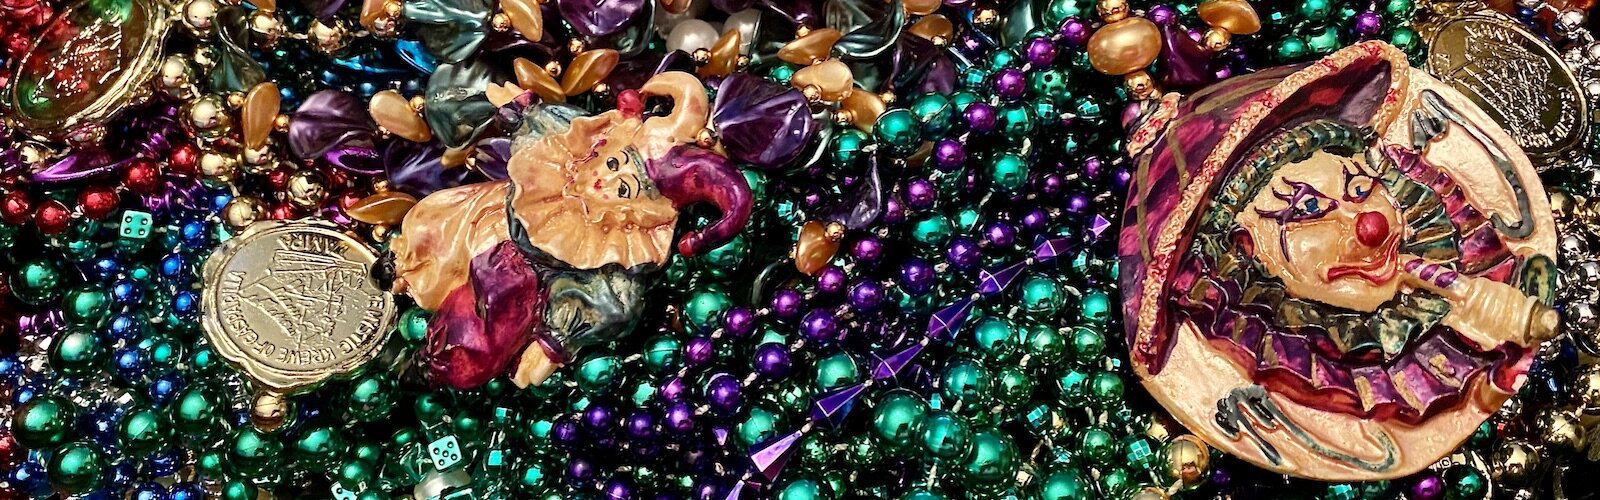 Beads, beads, beads are the local currency during Gasparilla, starting with the Children's Parade on January 22, 2022.